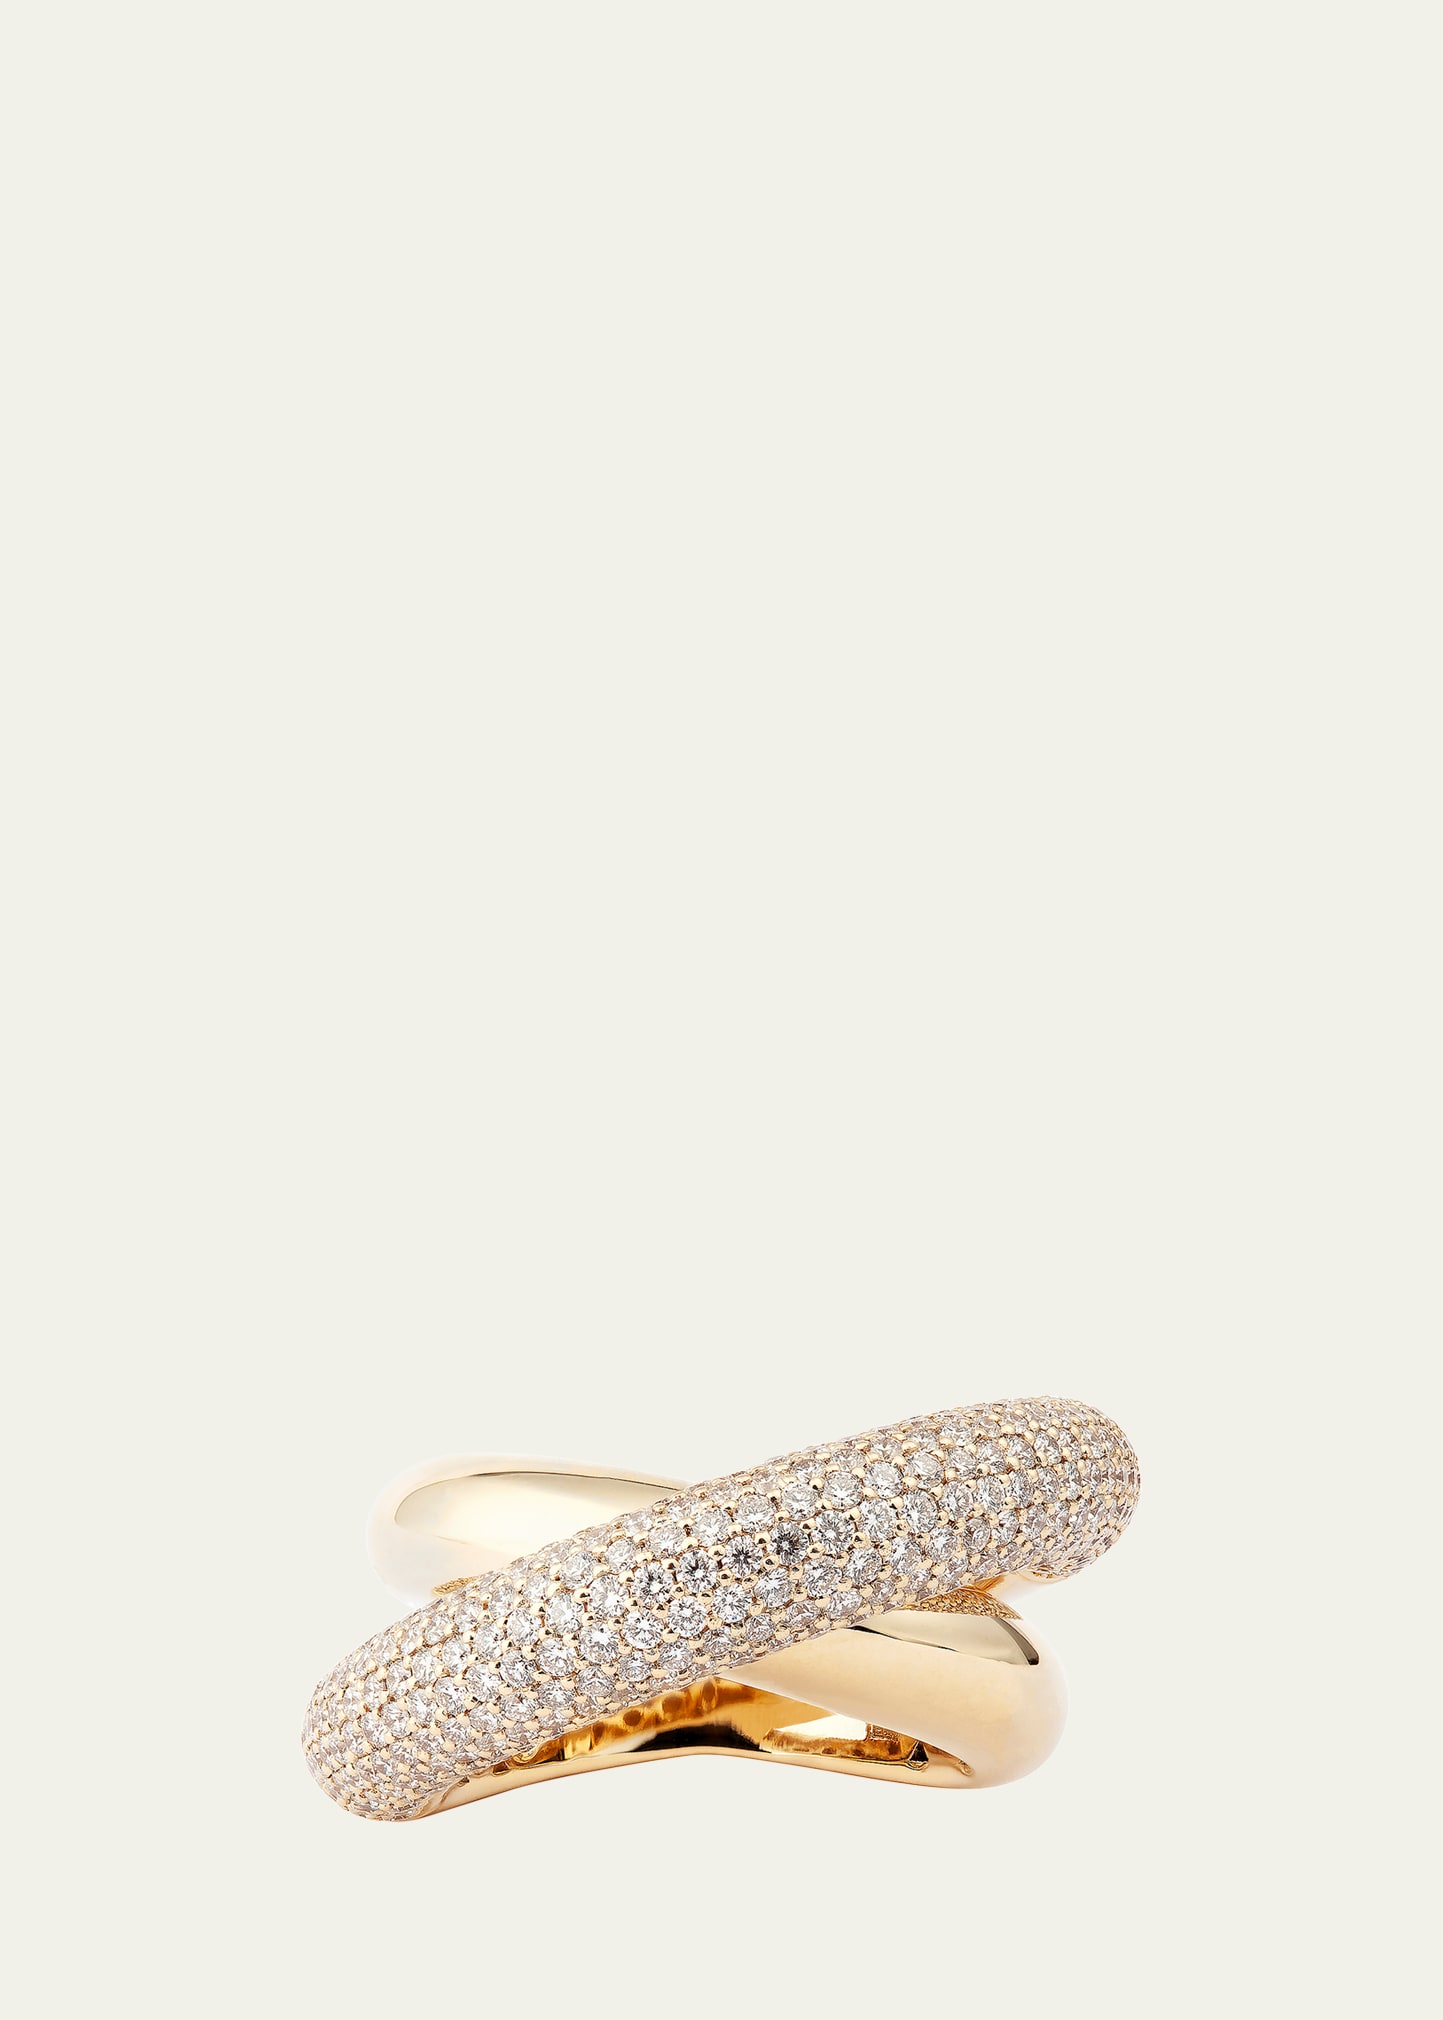 The Infinity Loop Ring, Big, Half Pavé in Yellow Gold and White Diamonds